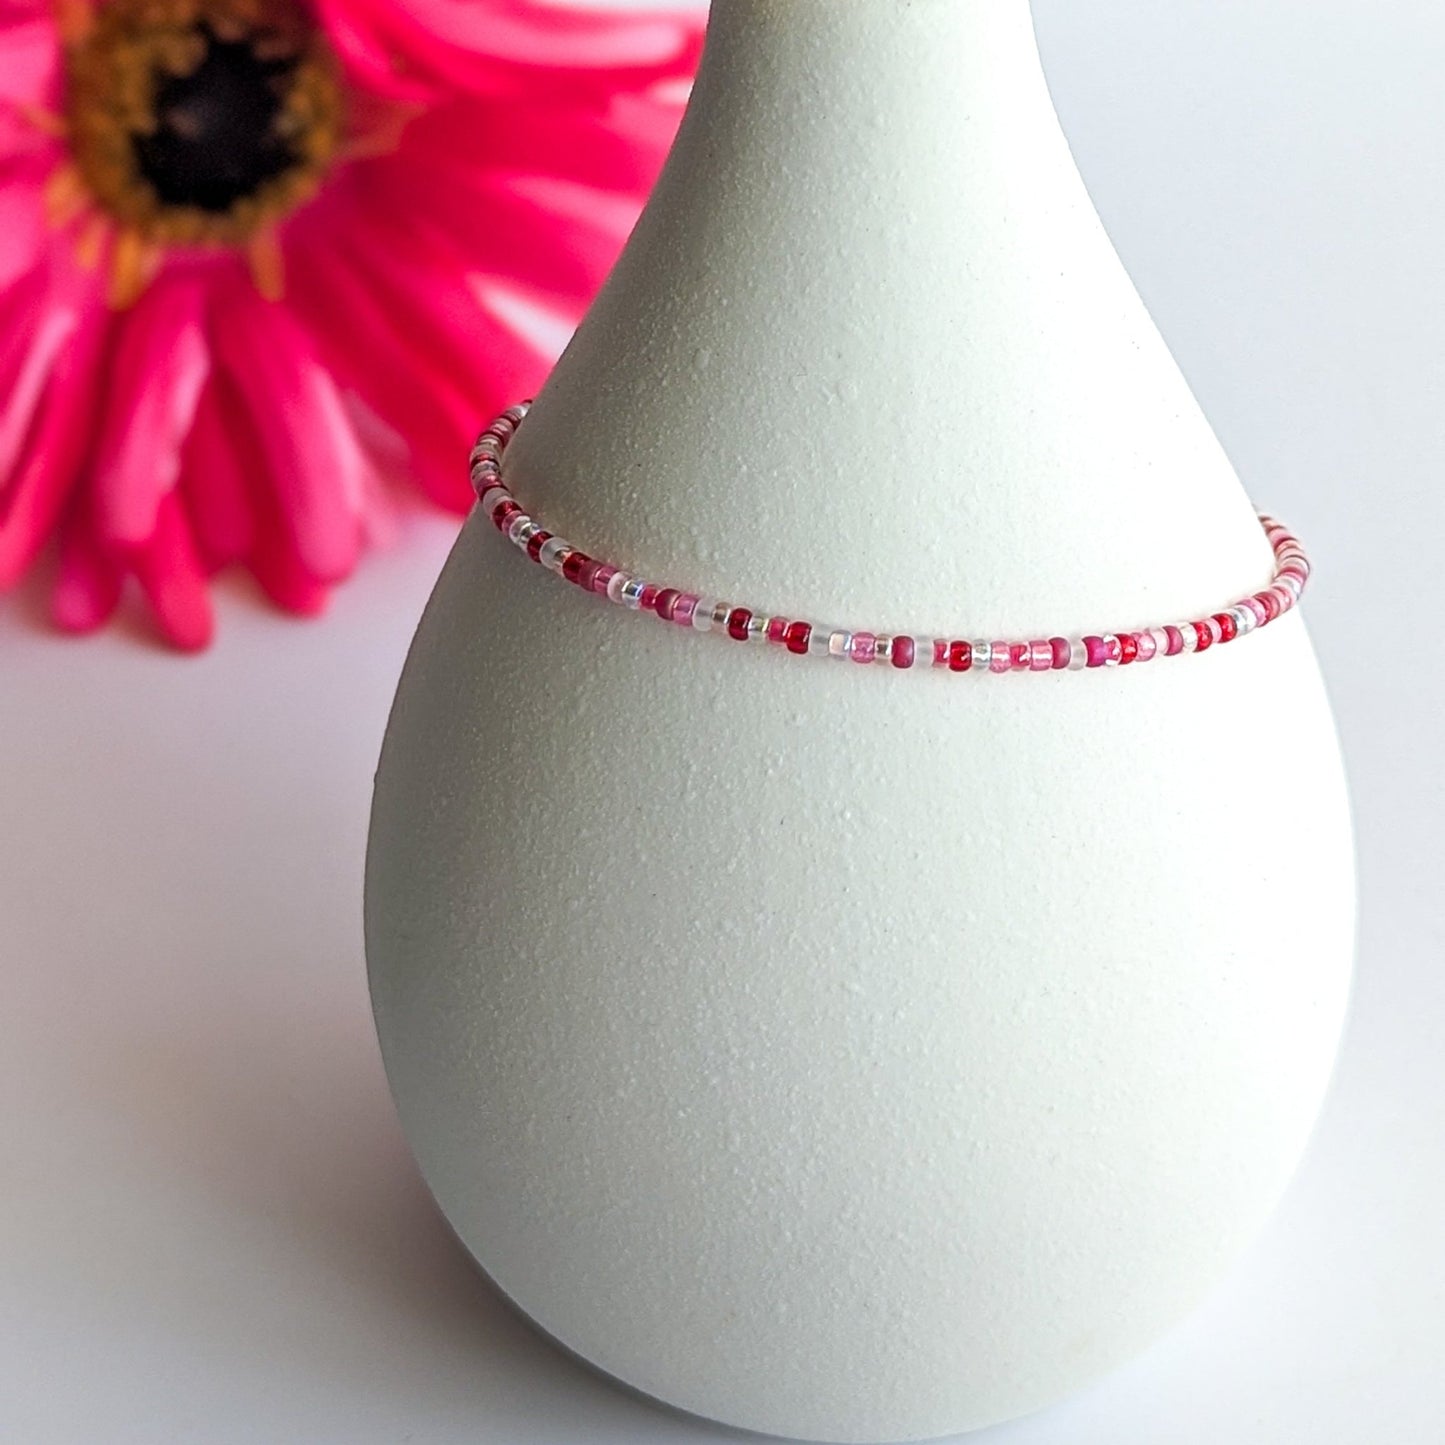 Dainty bracelet - Red, pink and white glass seed beads - creations by cherie